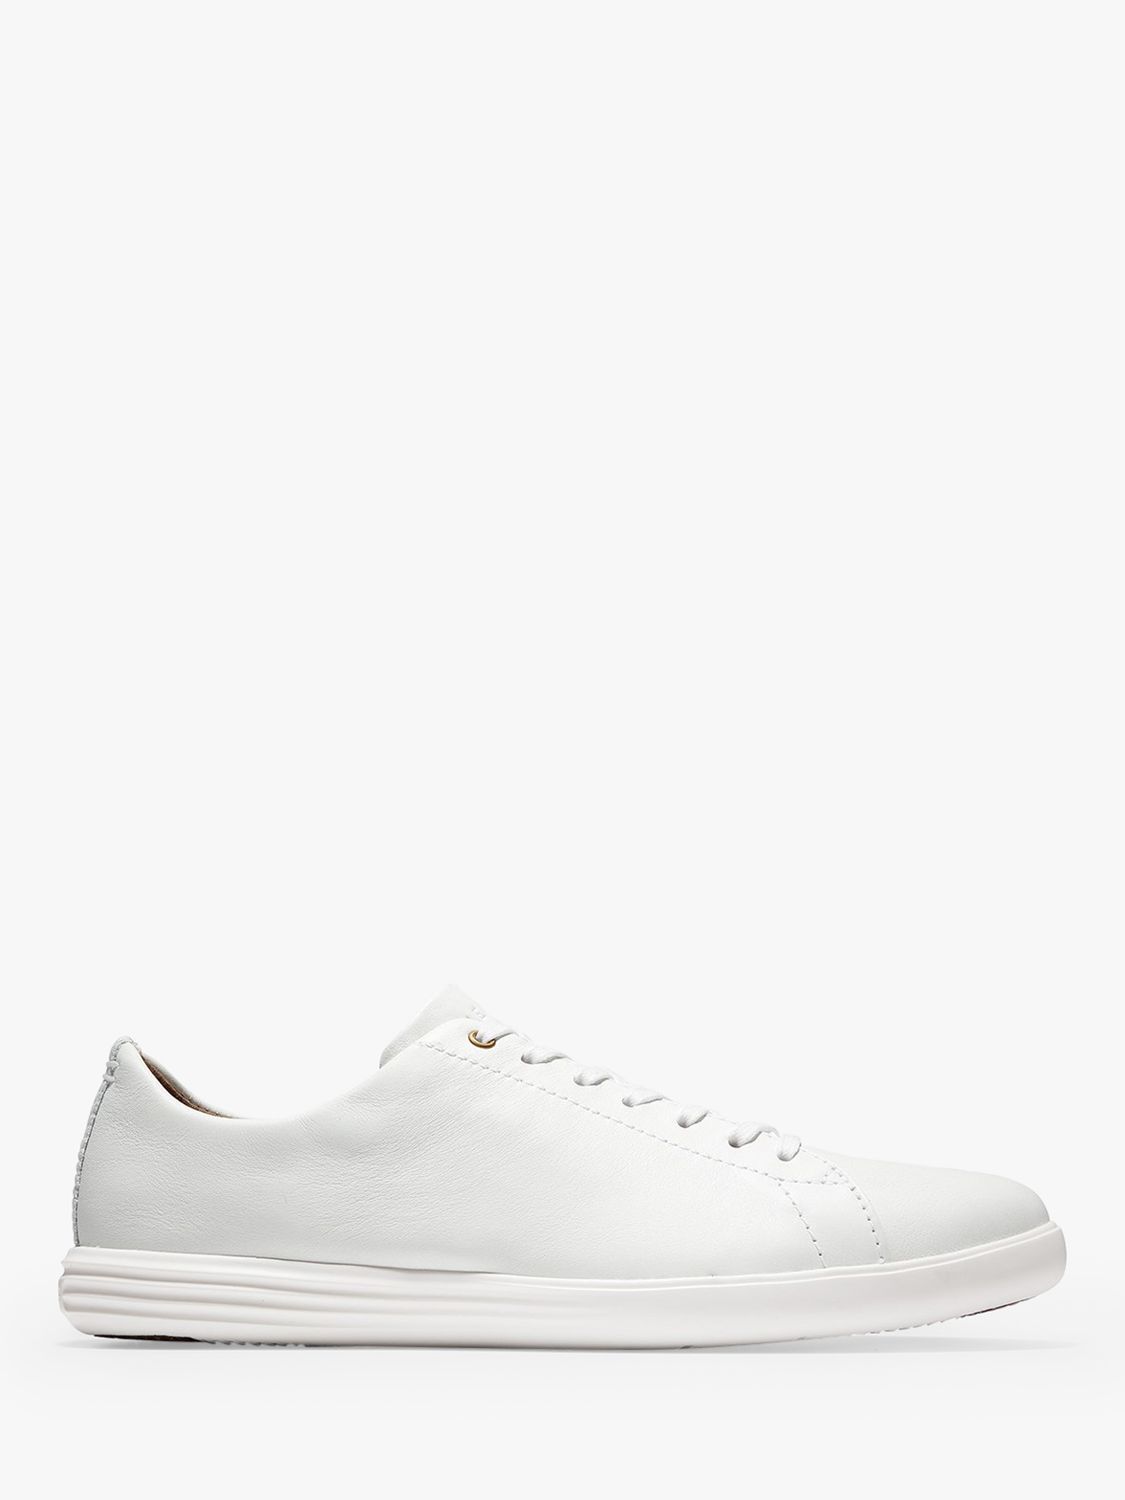 Cole Haan Men's Grand Crosscourt II Leather Trainers at John Lewis ...